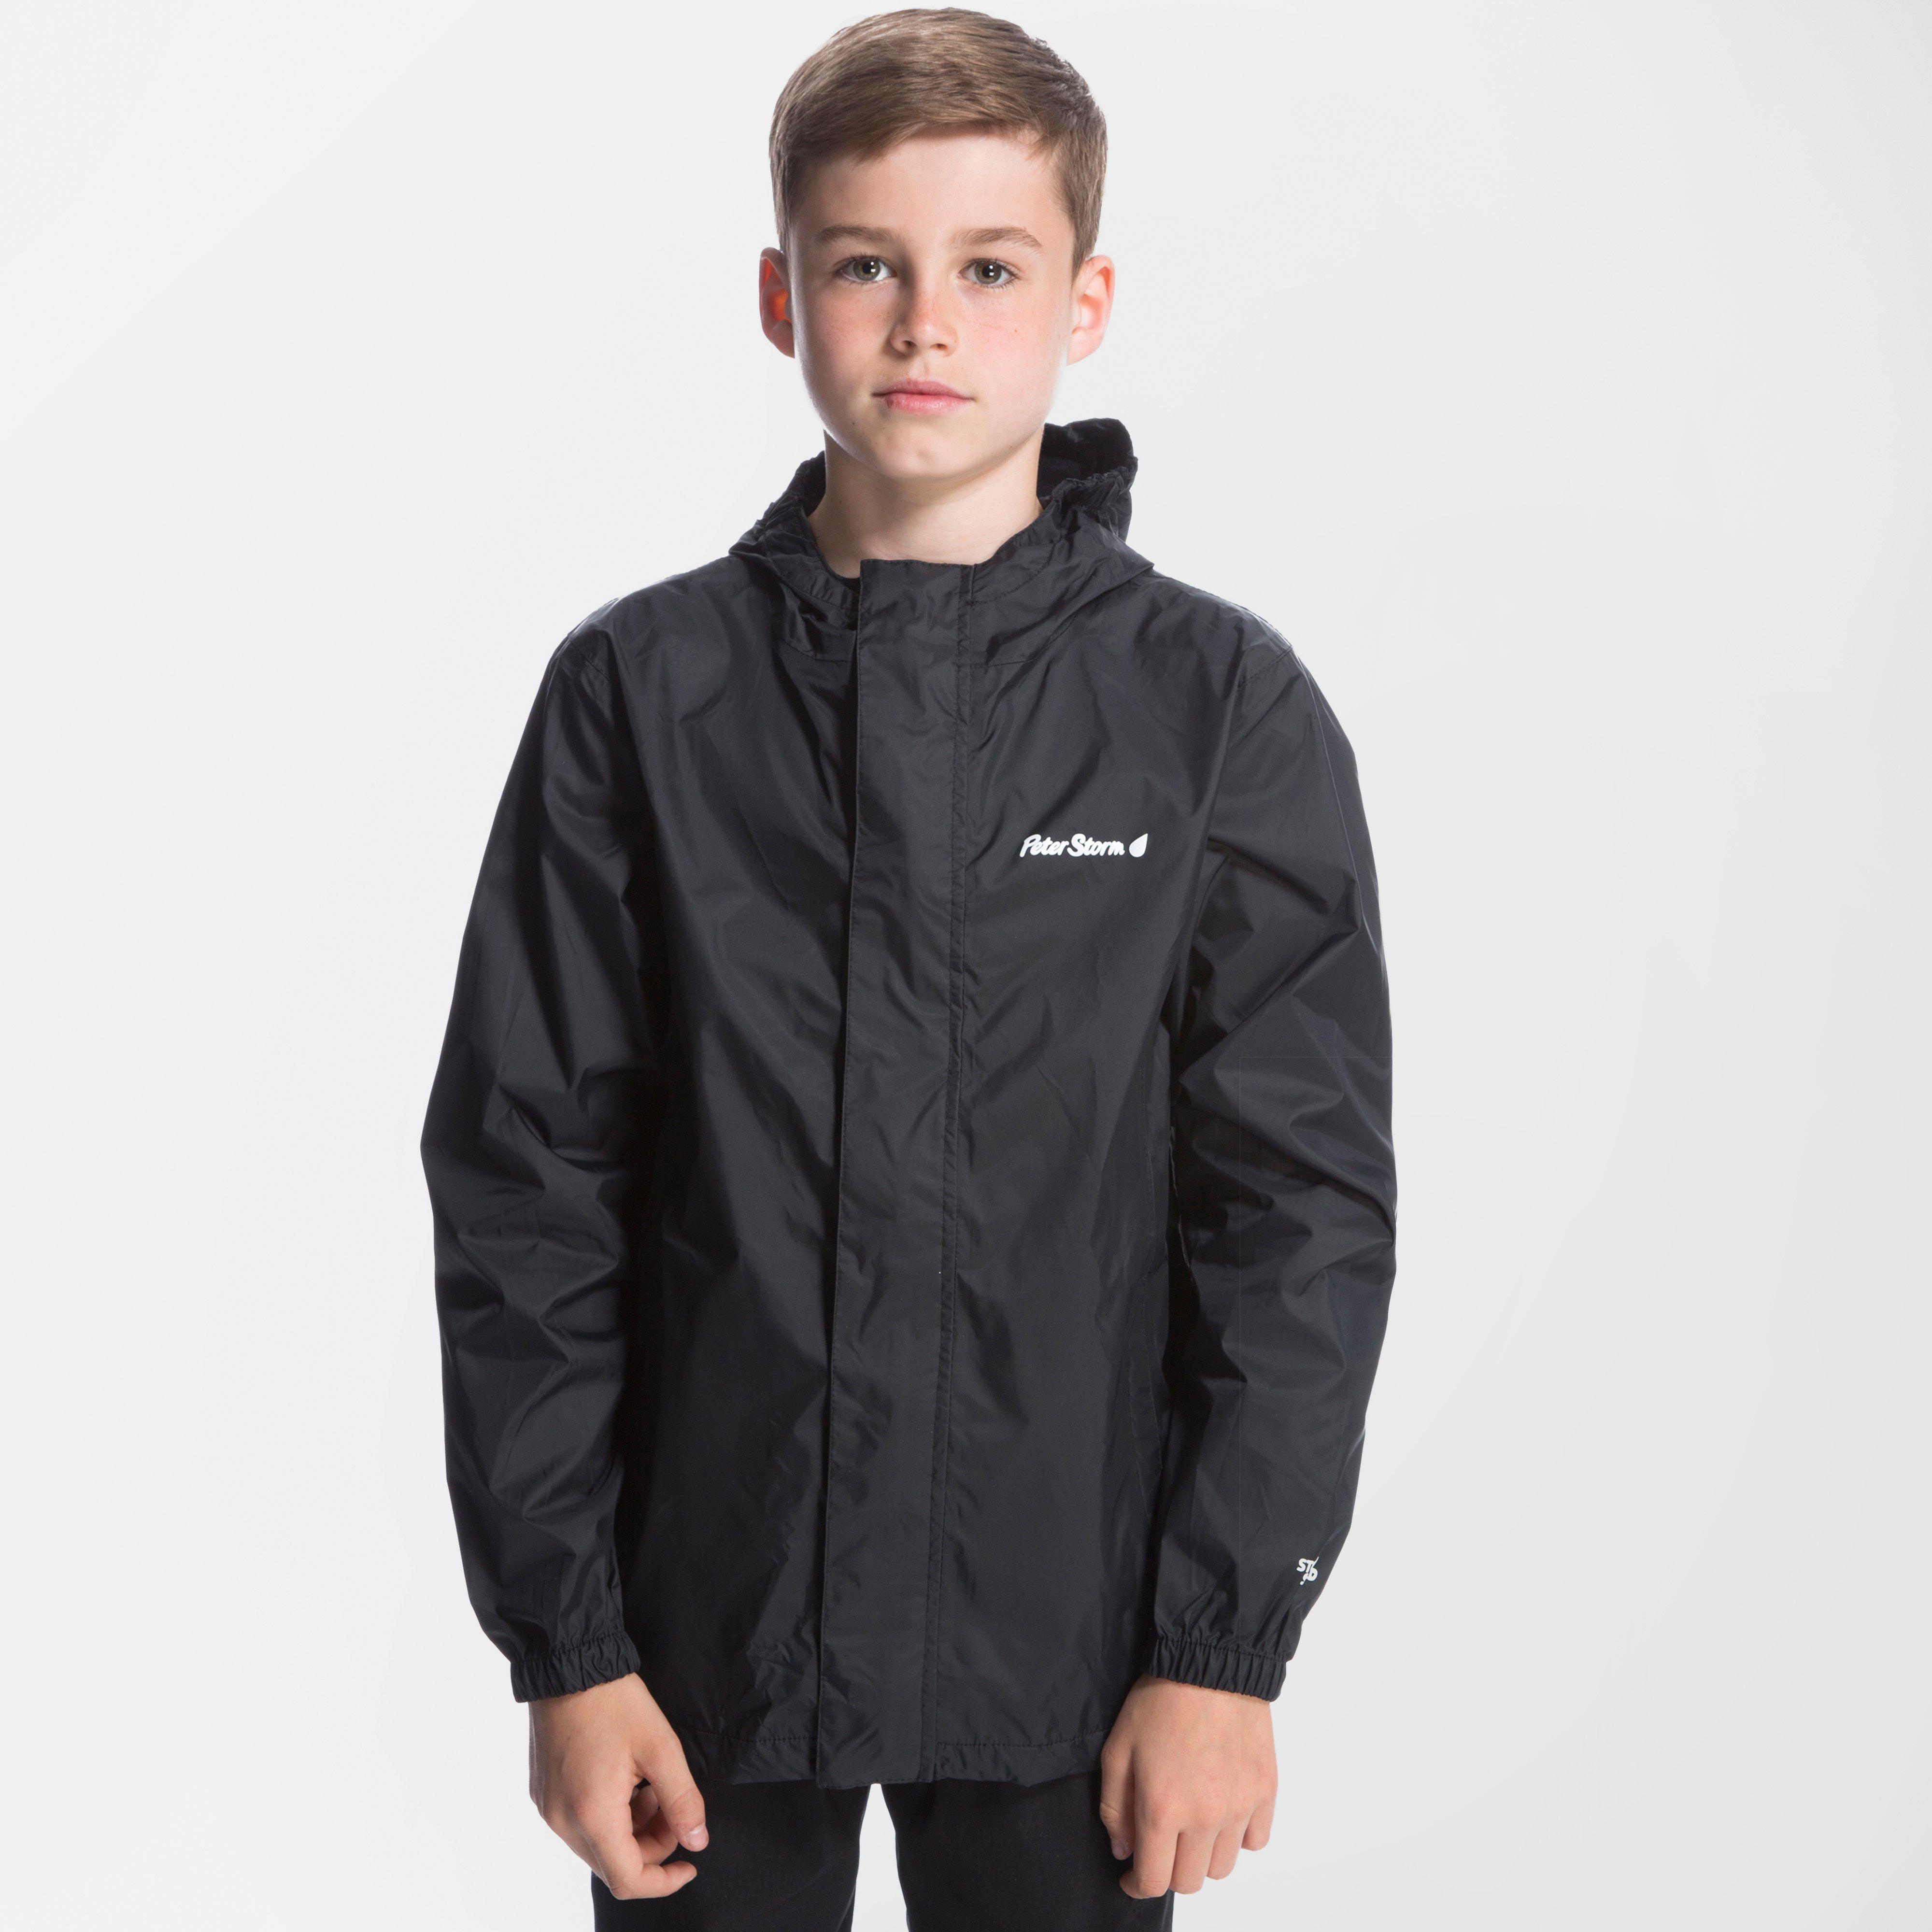 Childrens &amp Kids Outdoor Clothing | Millets